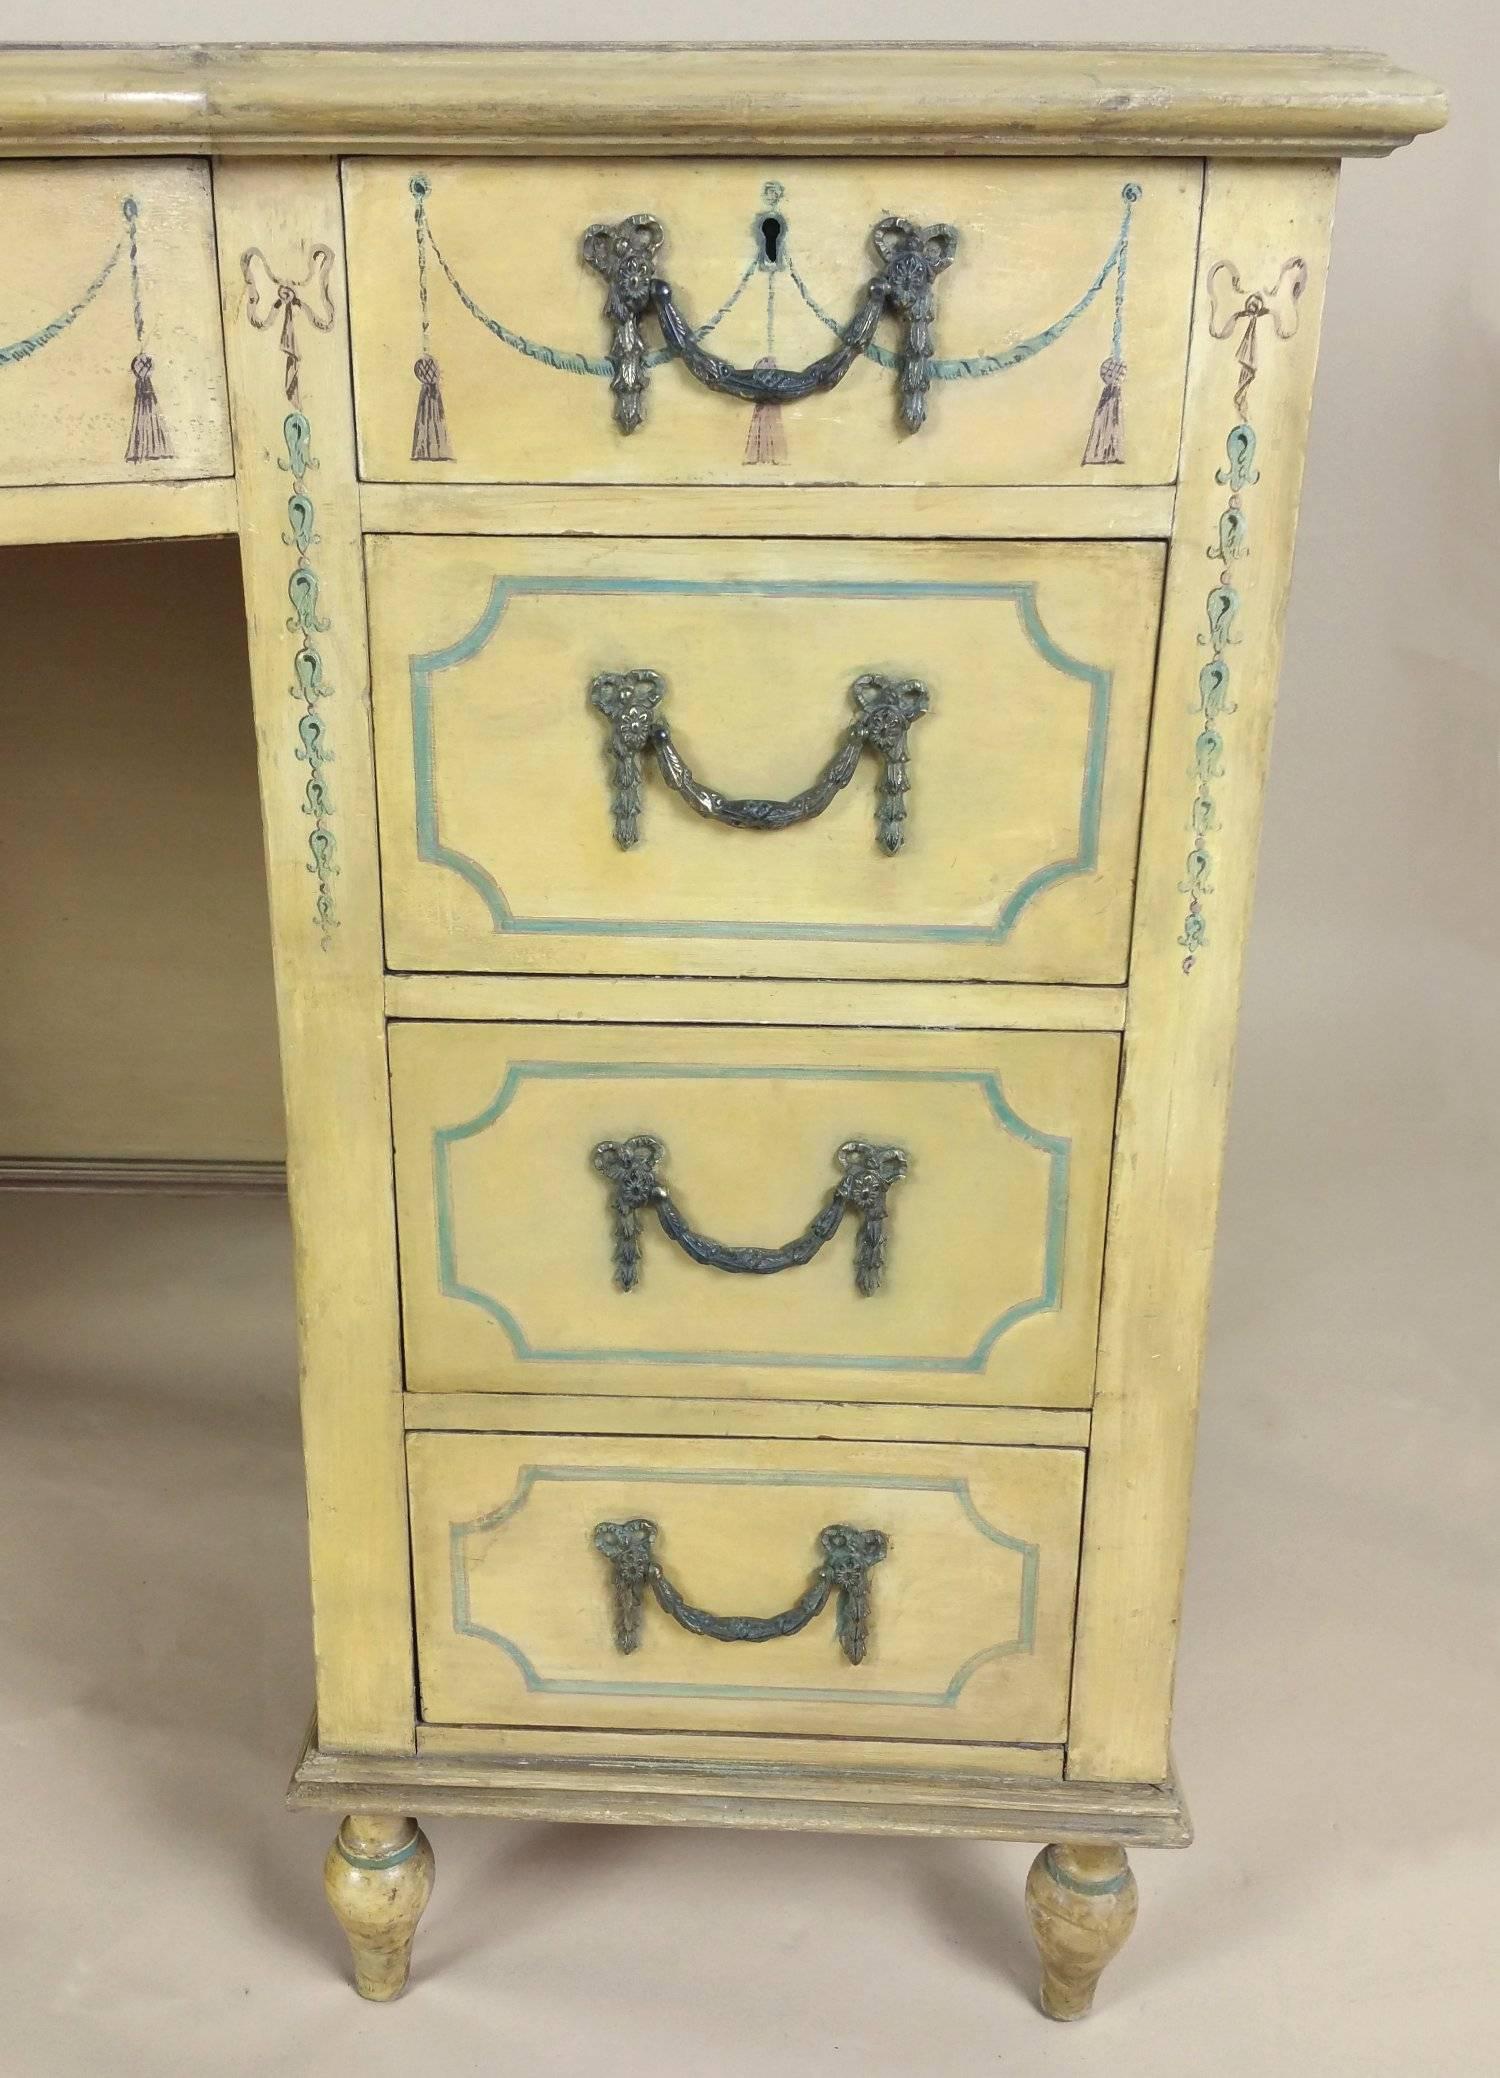 This unusually styled Edwardian cream painted knee hole desk features curved, shaped sides and a bow center front on six turned supports. The desk has one central top drawer flanked with four drawers on either side, with detailed swag and bow styled